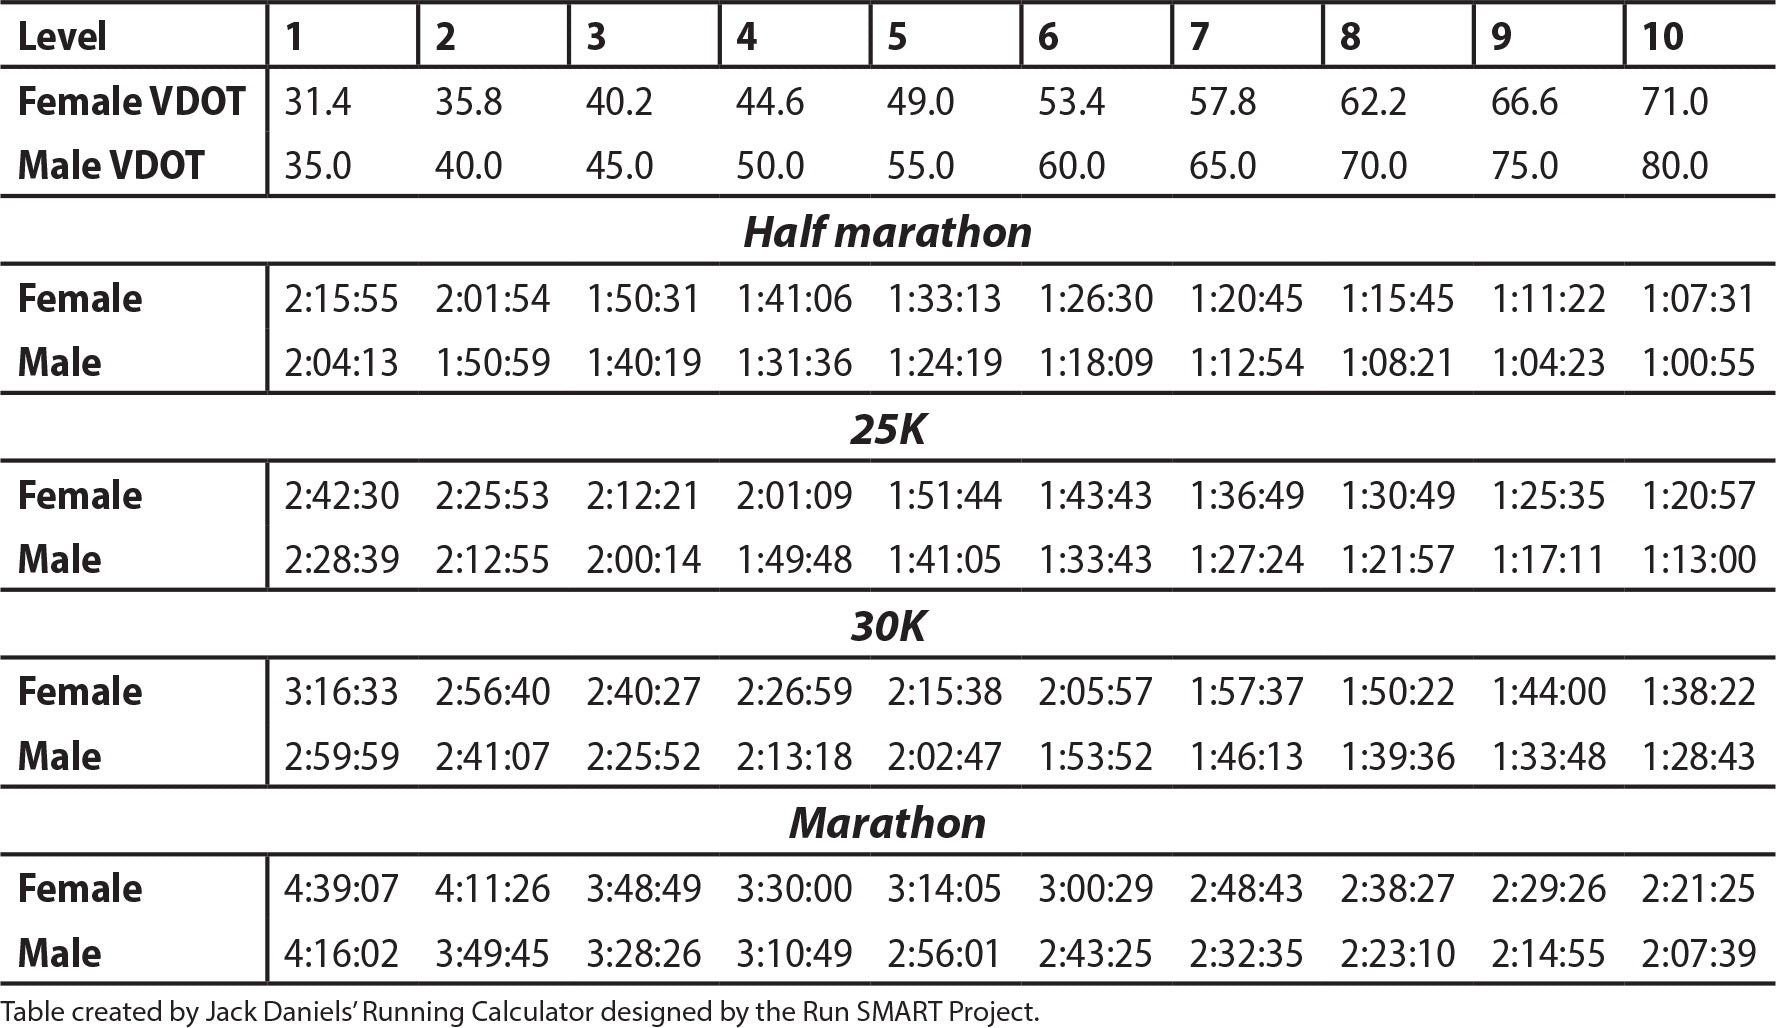 Table 5.4 Performance Levels for Females and Males Based on VDOT and Race Times